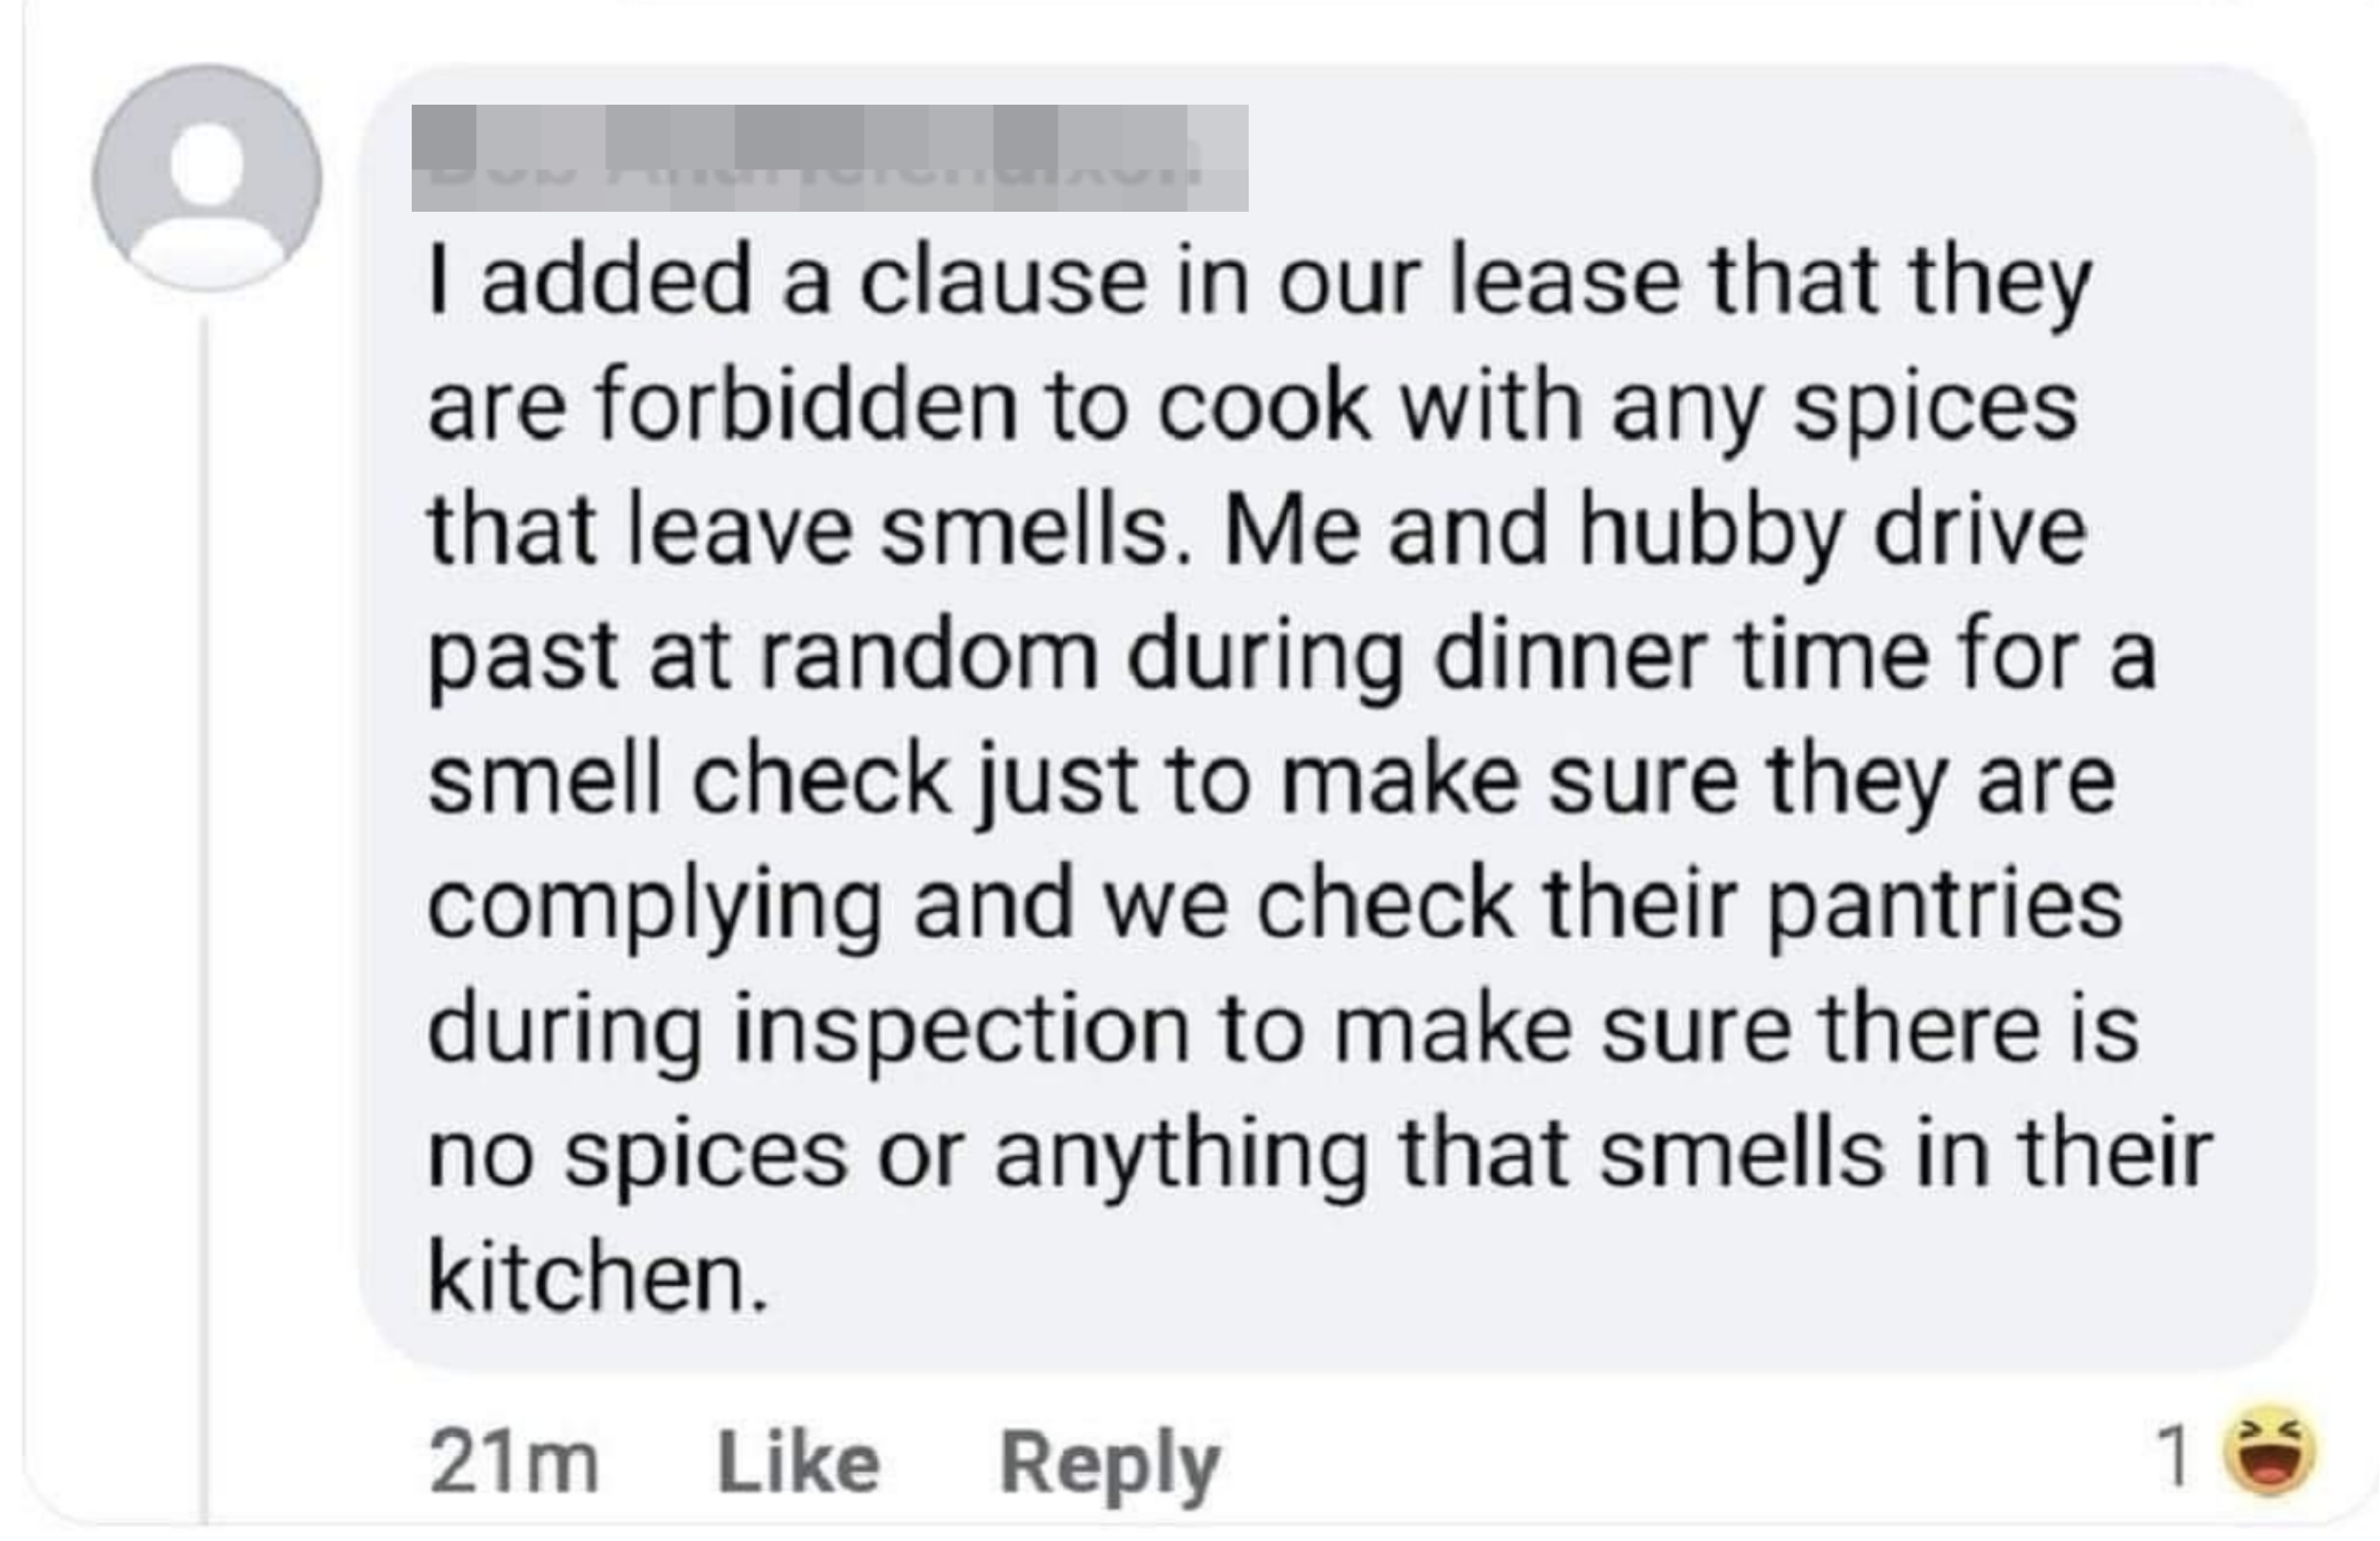 i added a clause in our lease that they are forbidden to cook with any spices that leave smells